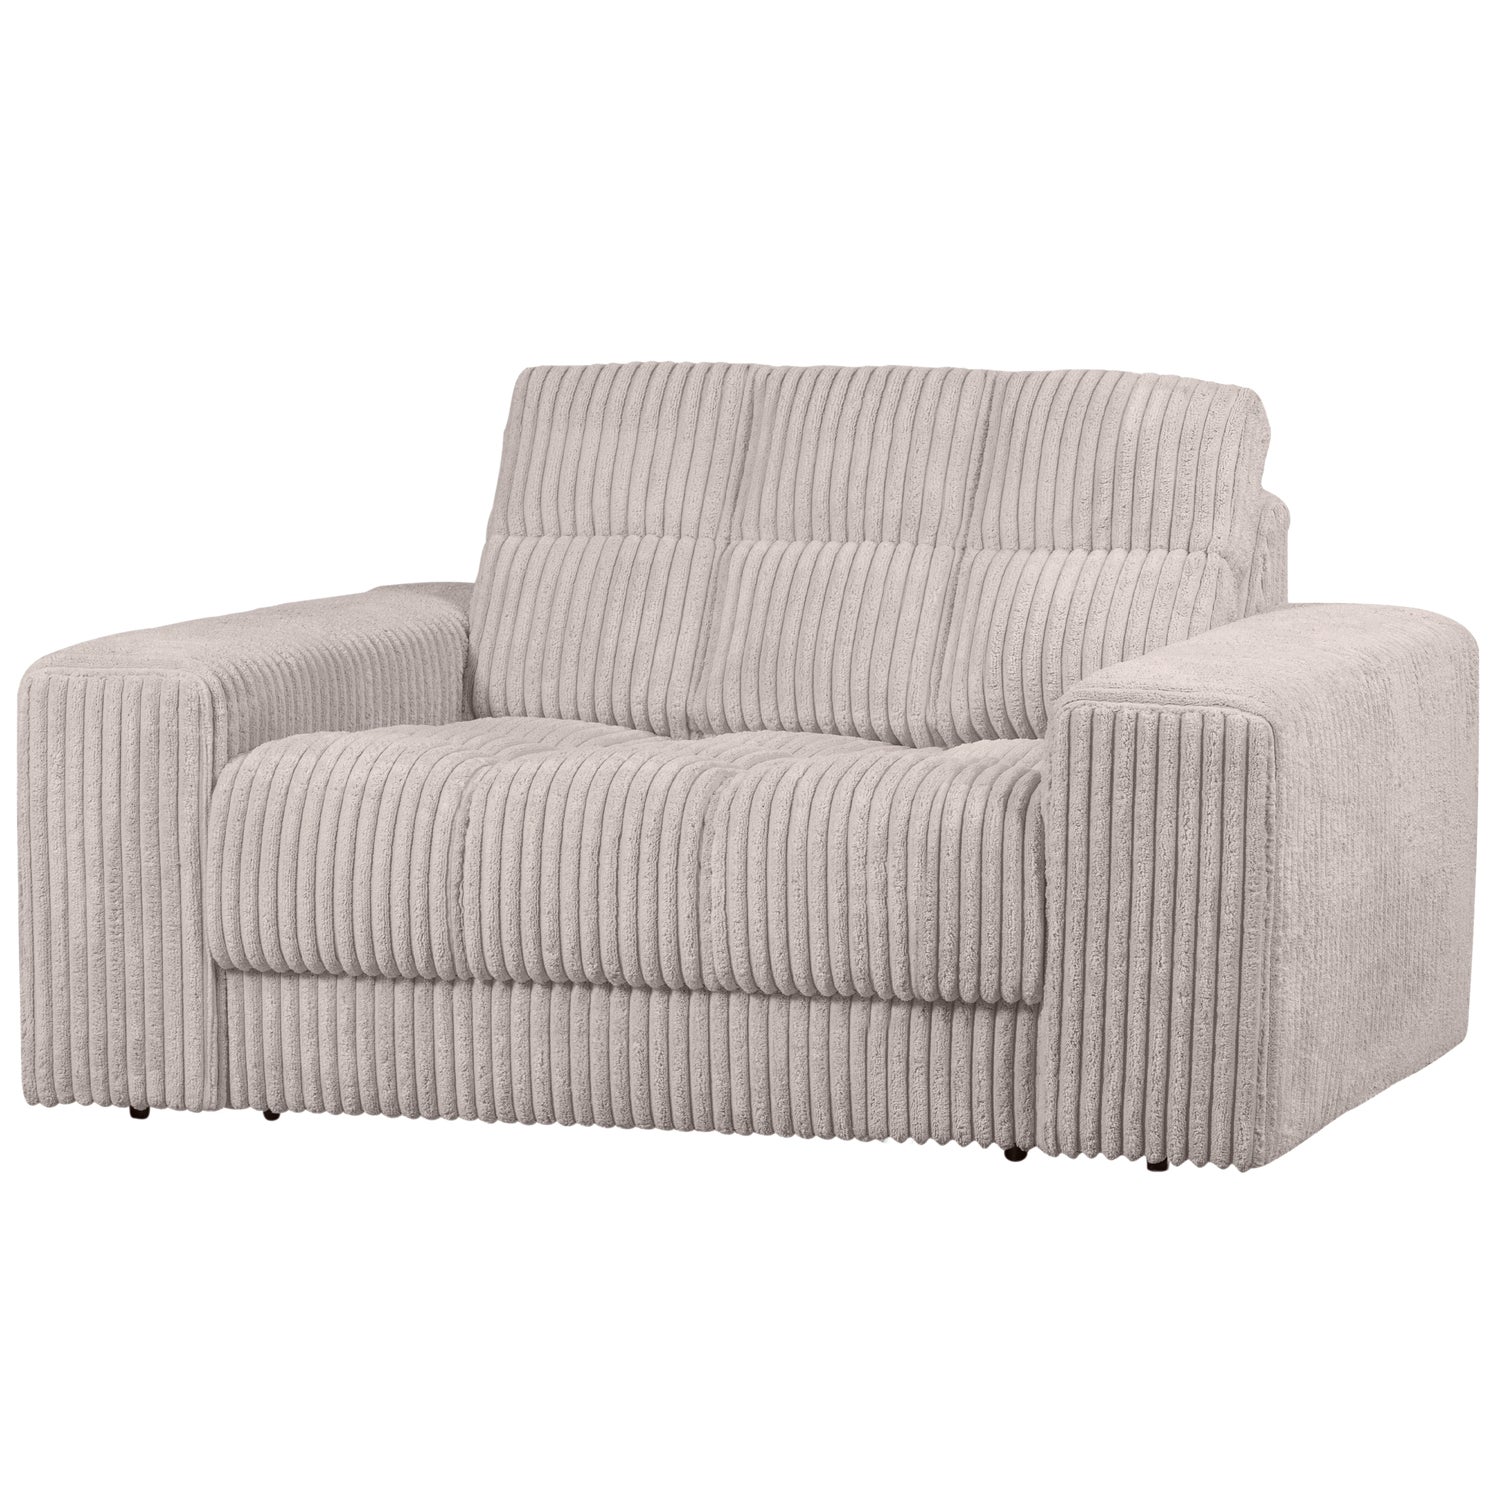 379006-RN-02_VS_WE_Second_date_loveseat_grove_ribstof_naturel_SA.png?auto=webp&format=png&width=1500&height=1500